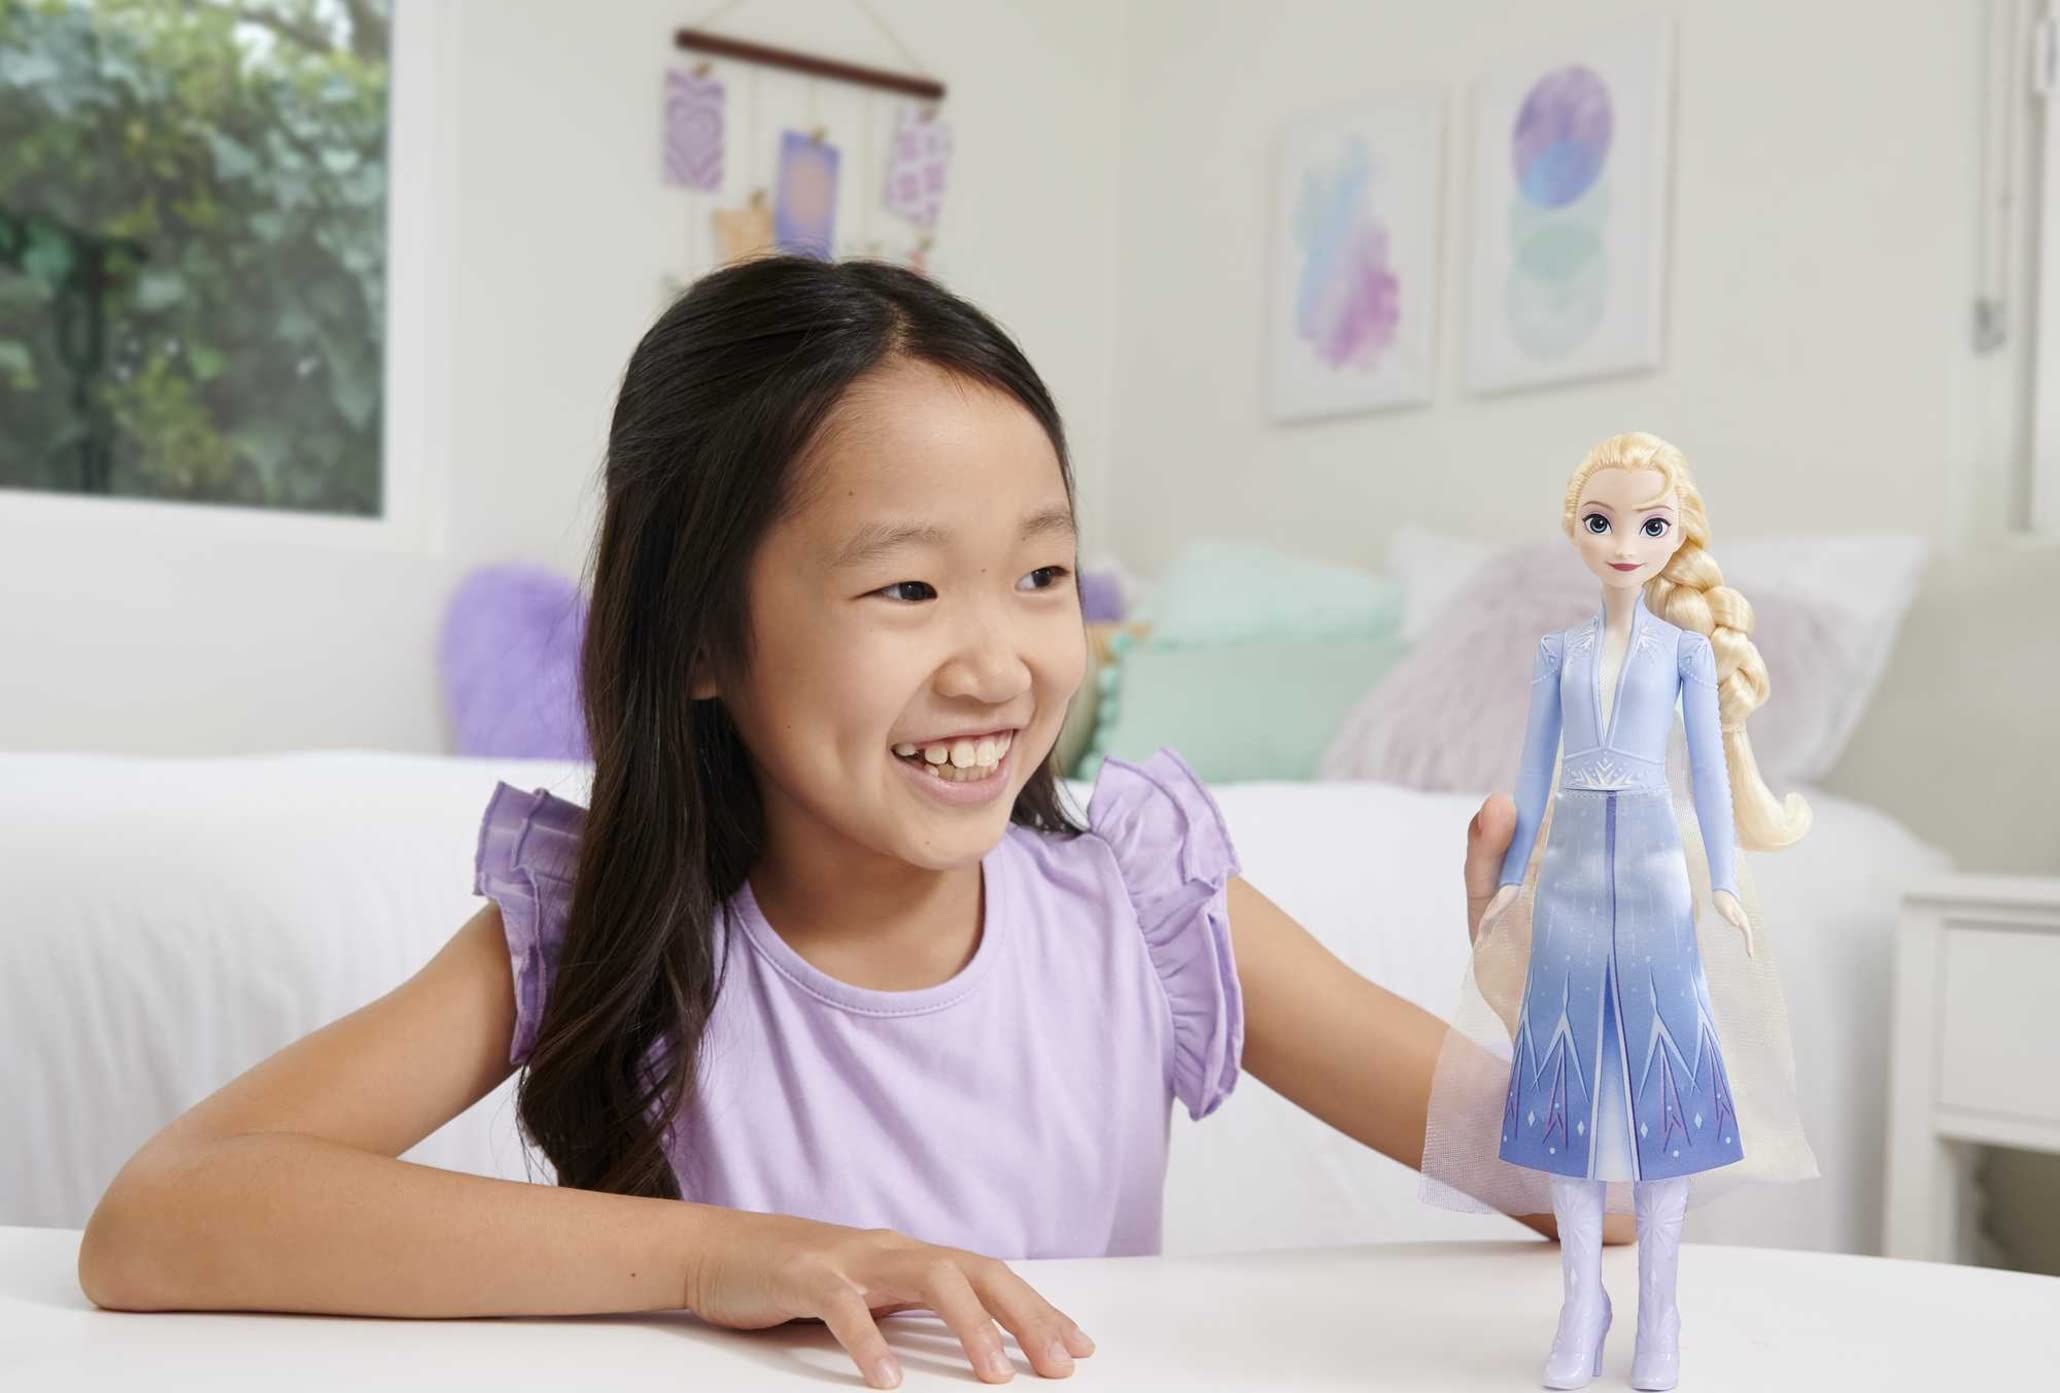 Disney Frozen by Mattel Elsa Fashion Doll & Accessory, Signature Look, Toy Inspired by the Movie Disney Frozen by Mattel 2